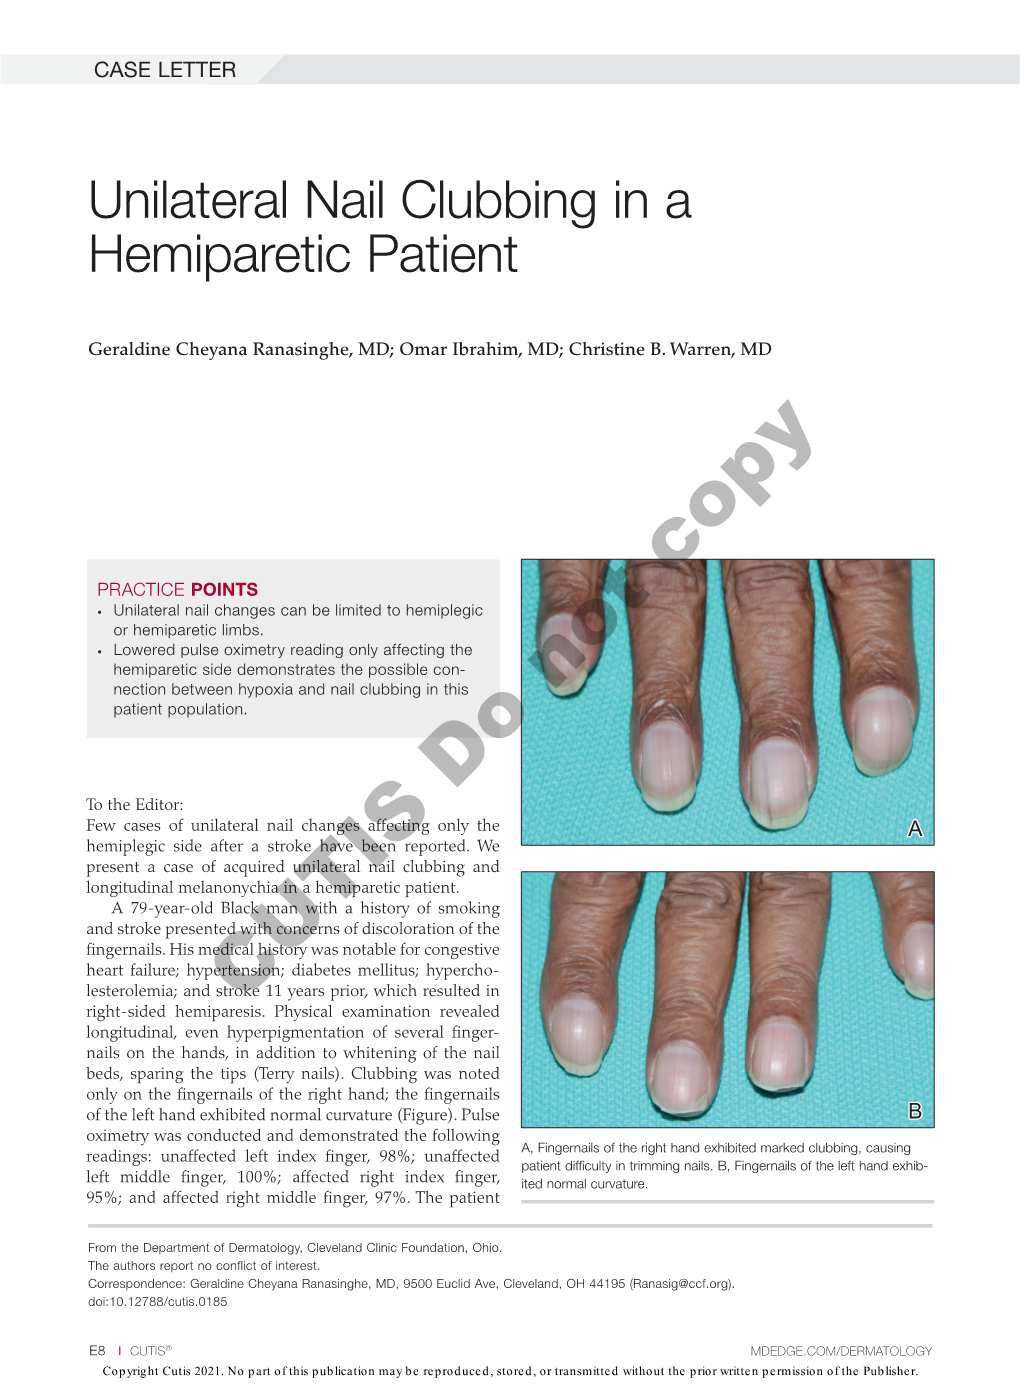 Unilateral Nail Clubbing in a Hemiparetic Patient